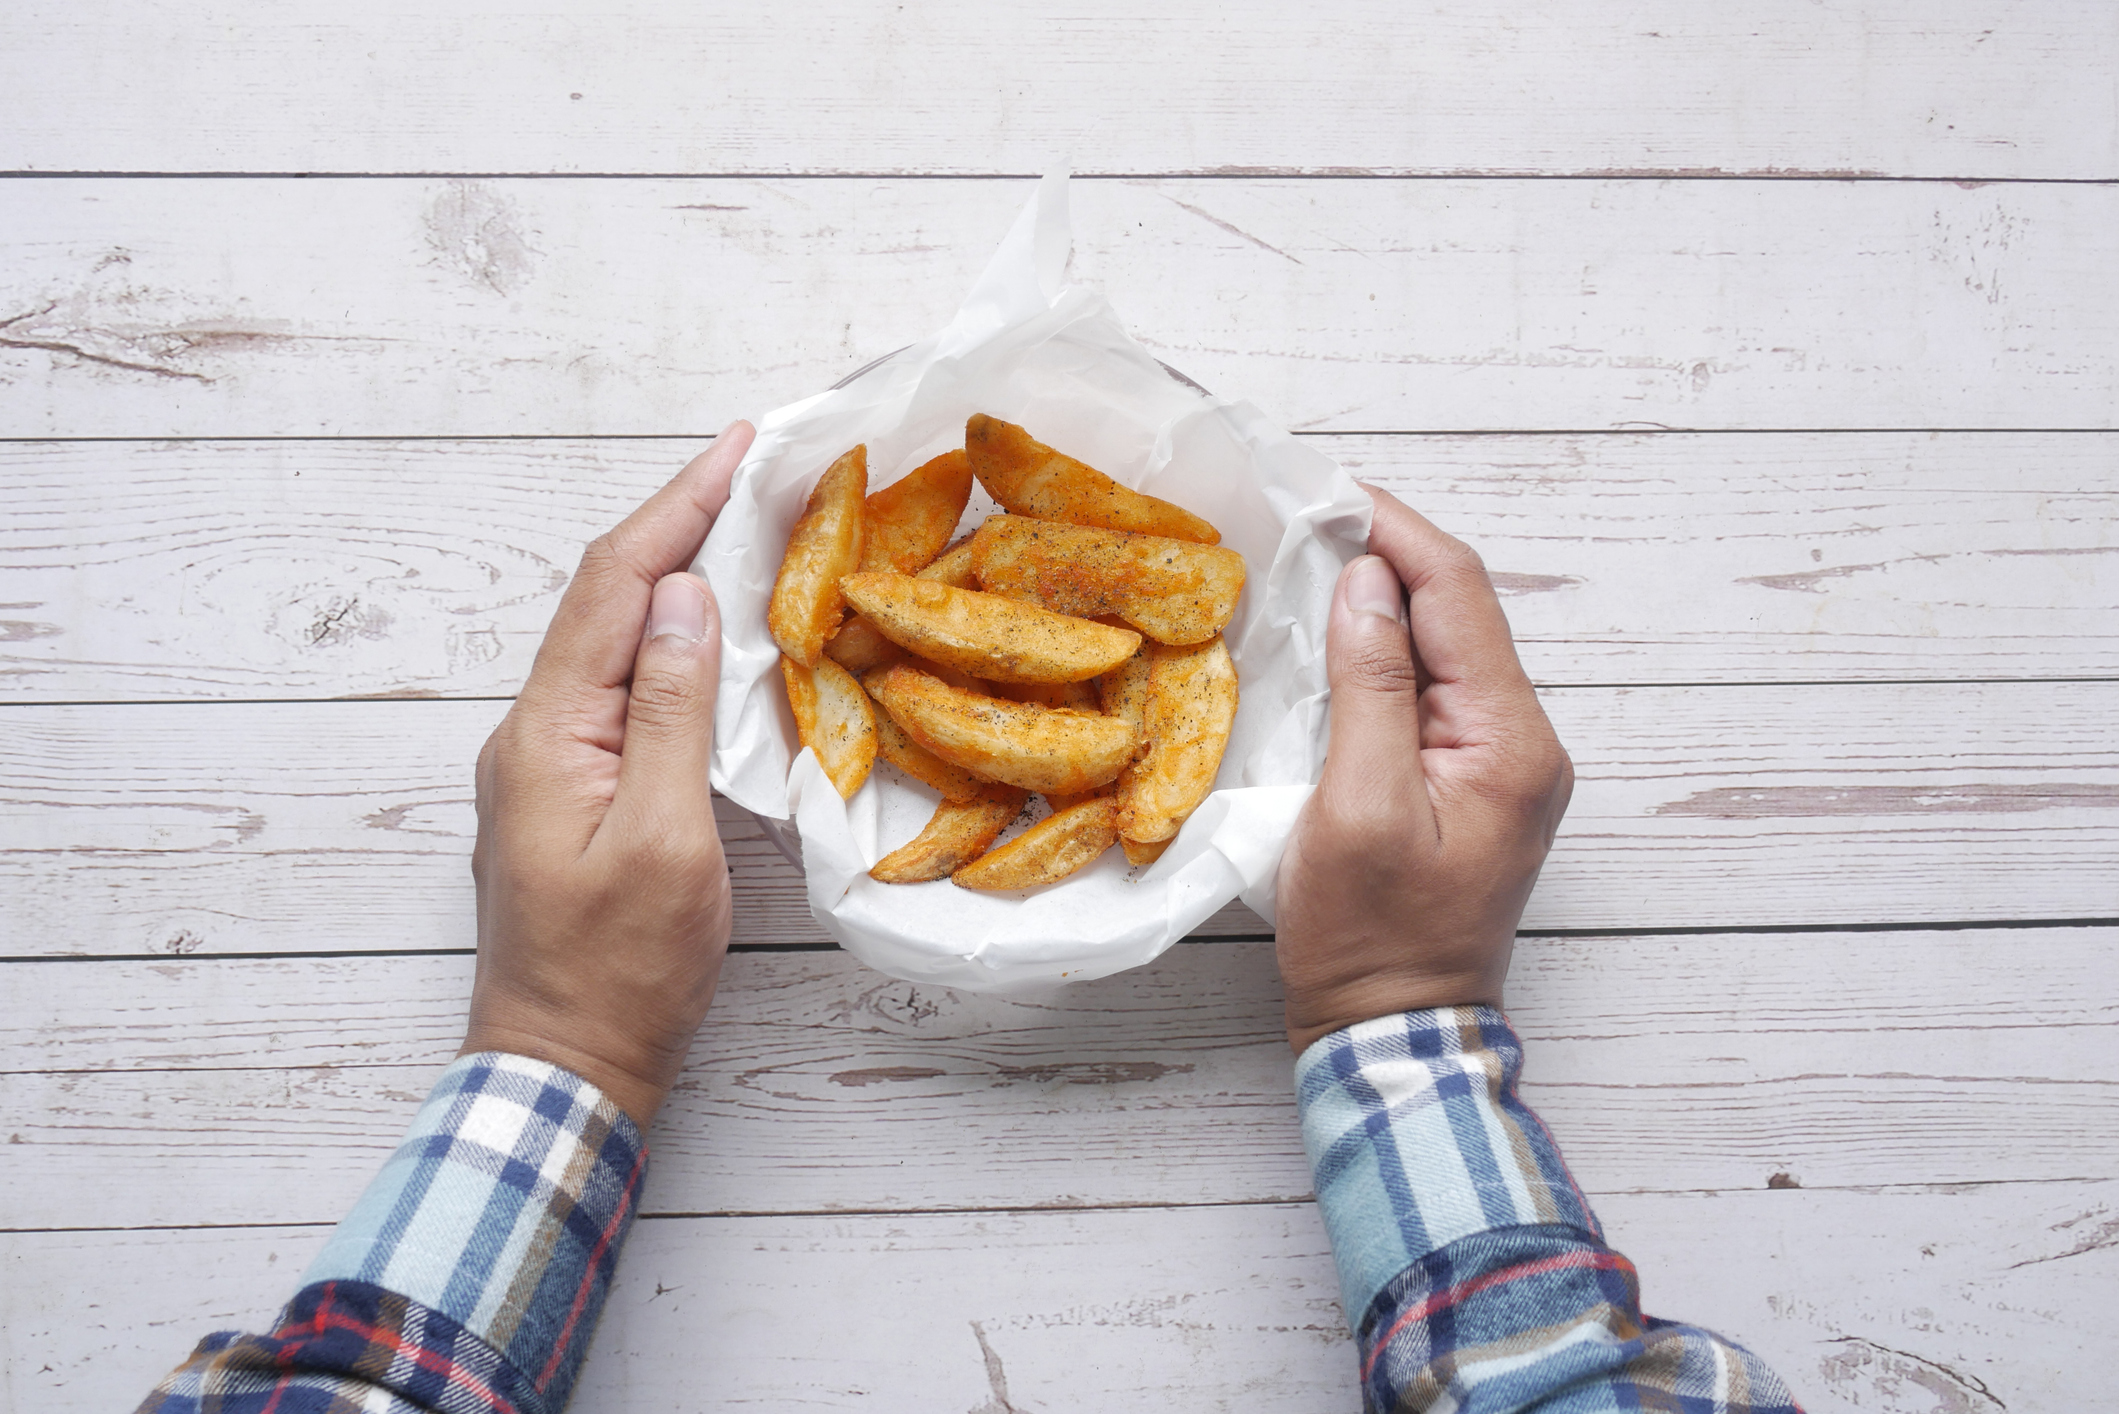 Is it possible to eat French fries and lower blood pressure?